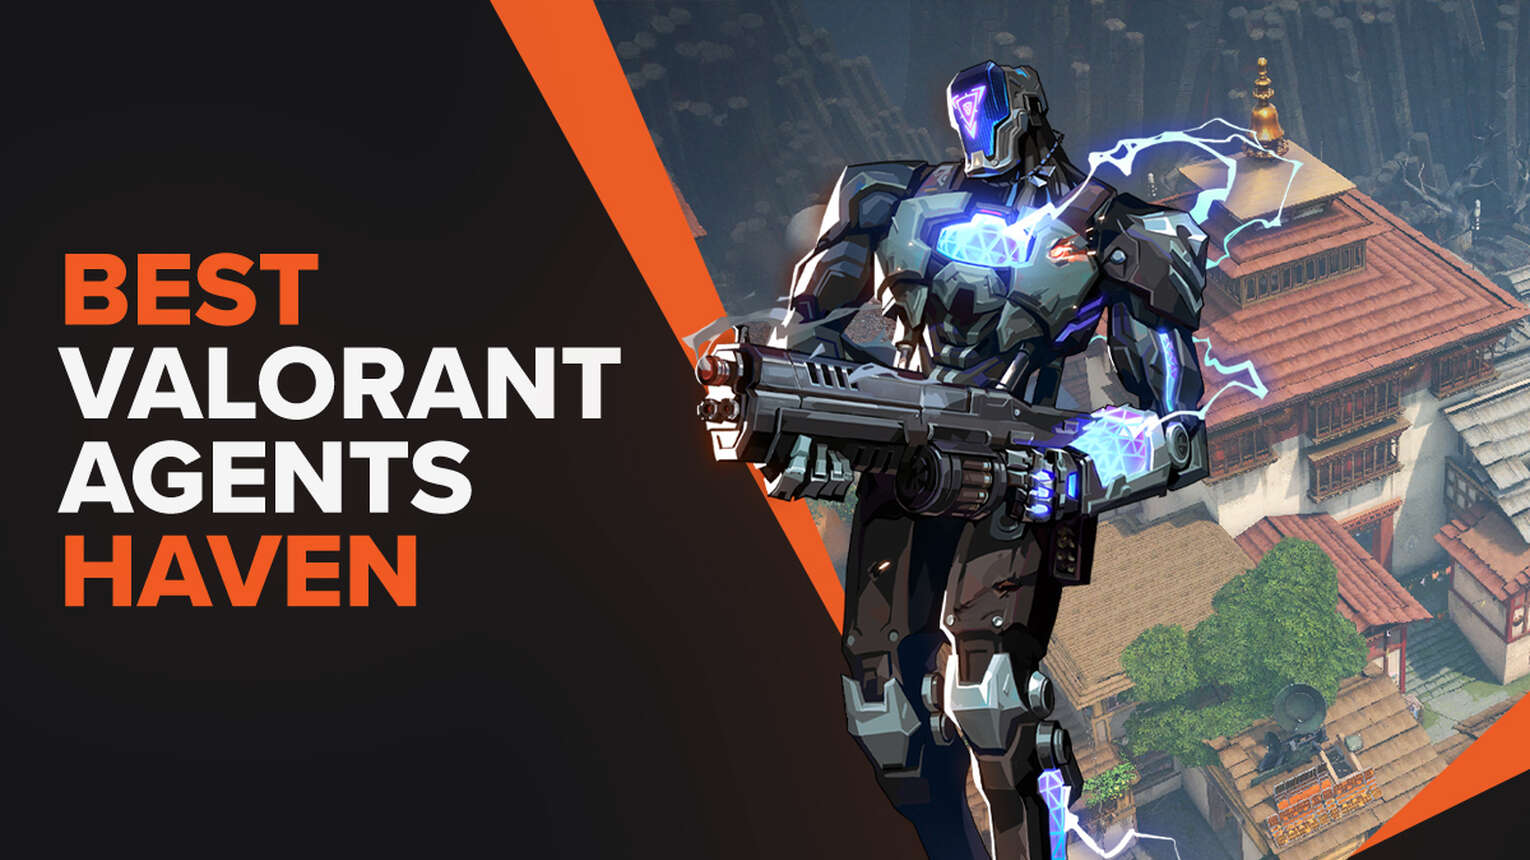 The best Valorant agents for Haven